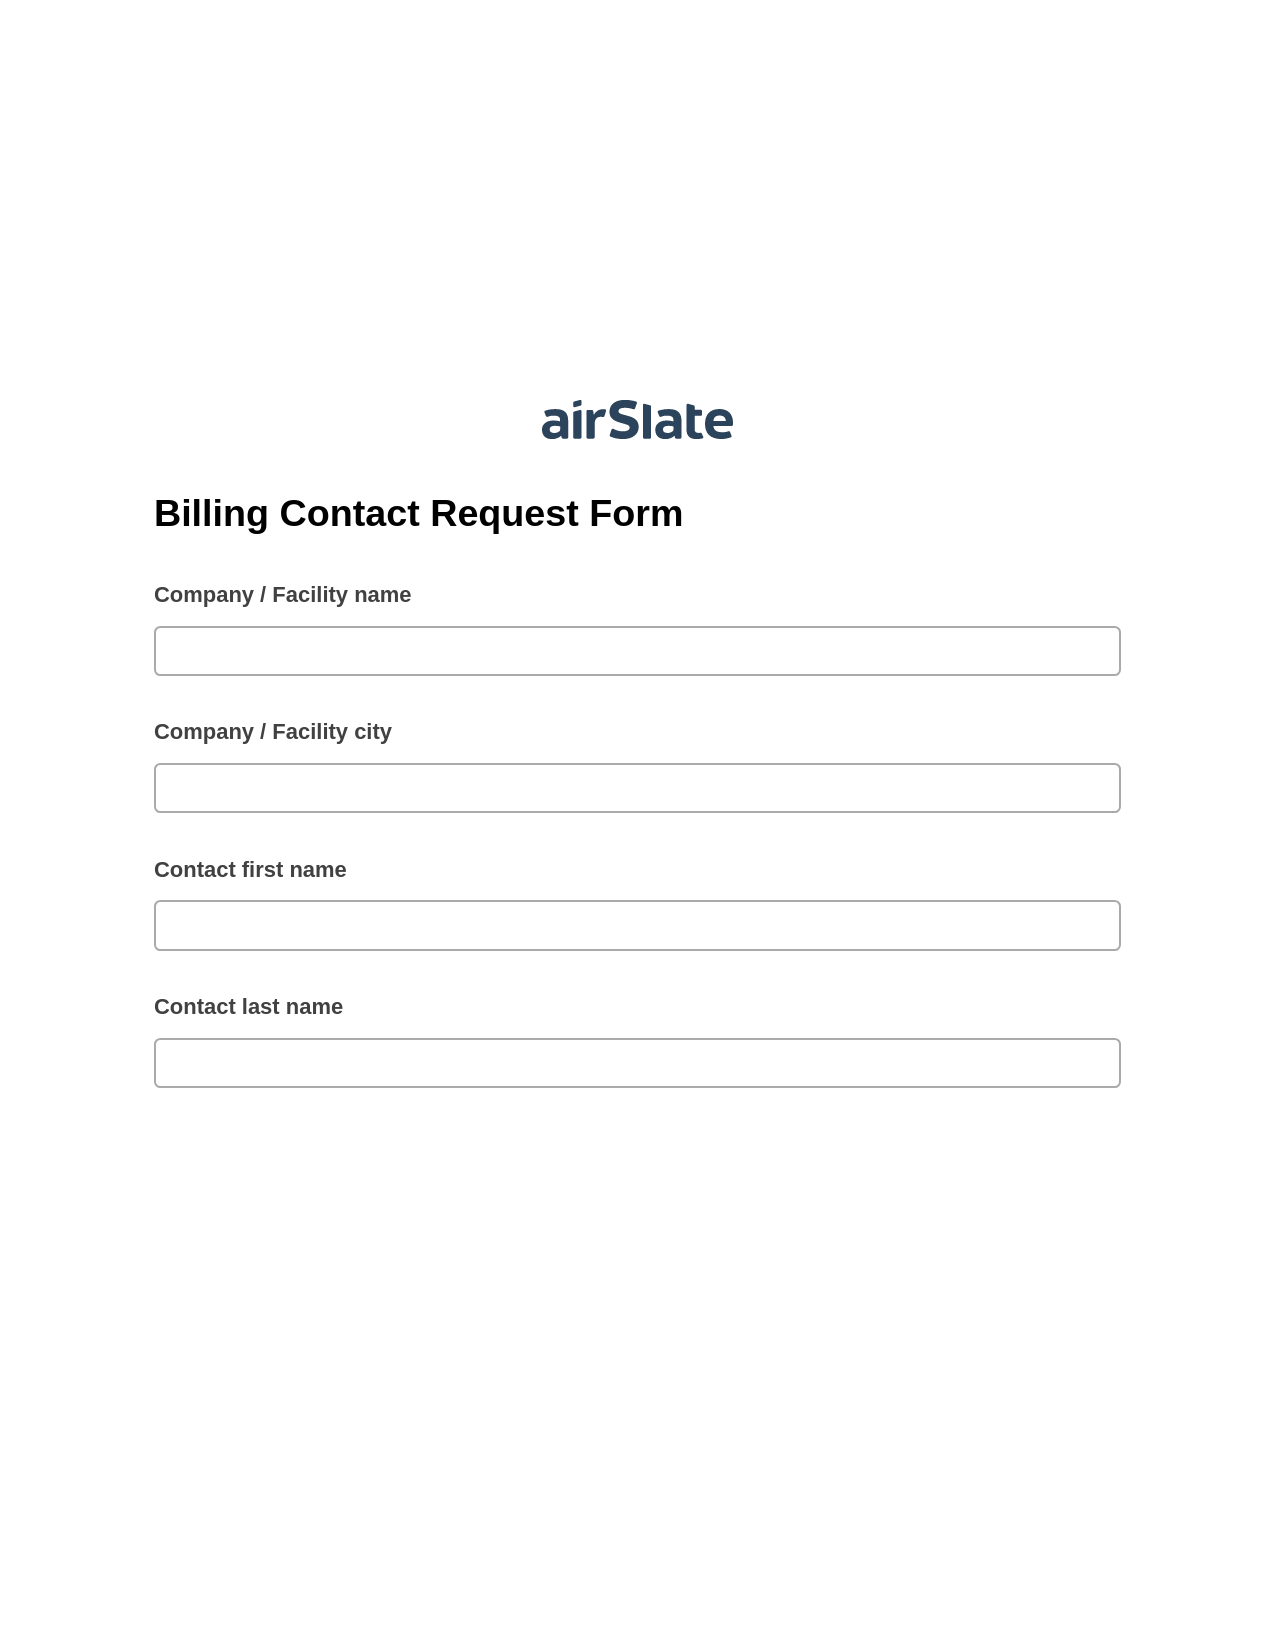 Billing Contact Request Form Pre-fill Dropdown from Airtable, Send Mailchimp Campaign Bot, Export to NetSuite Record Bot